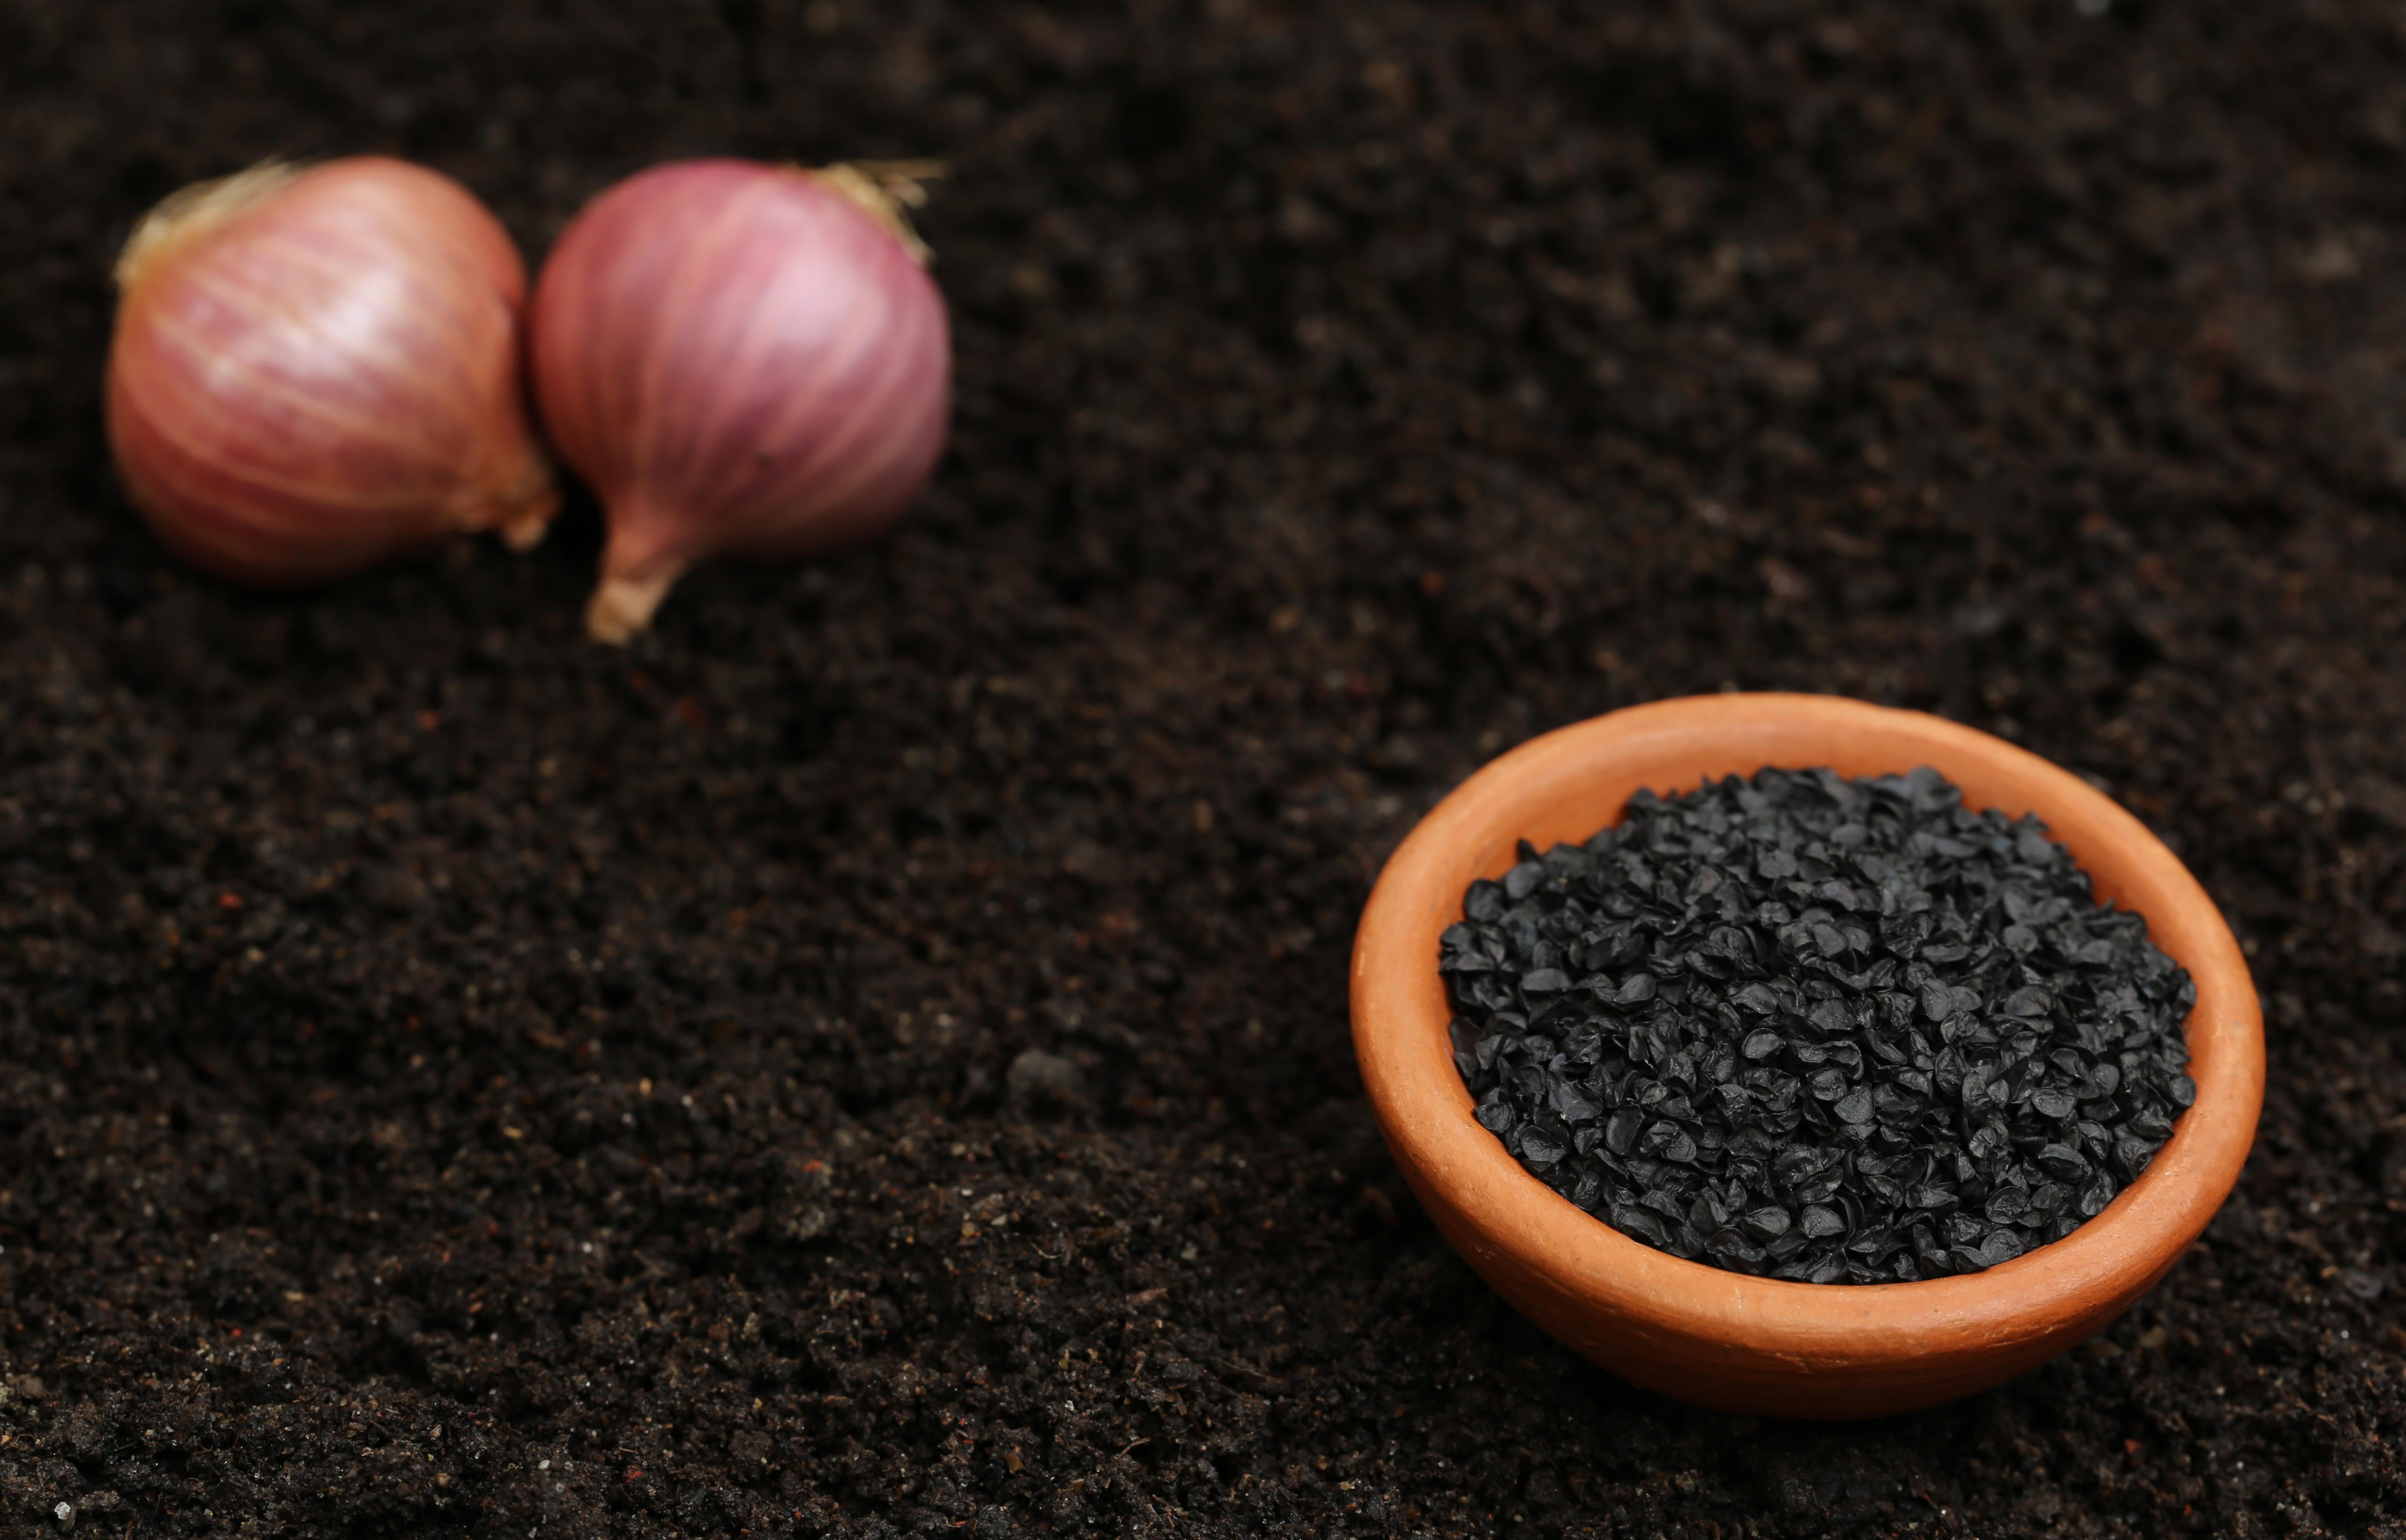 Onion seeds are small, black, and triangular; they look like little shards of coal.